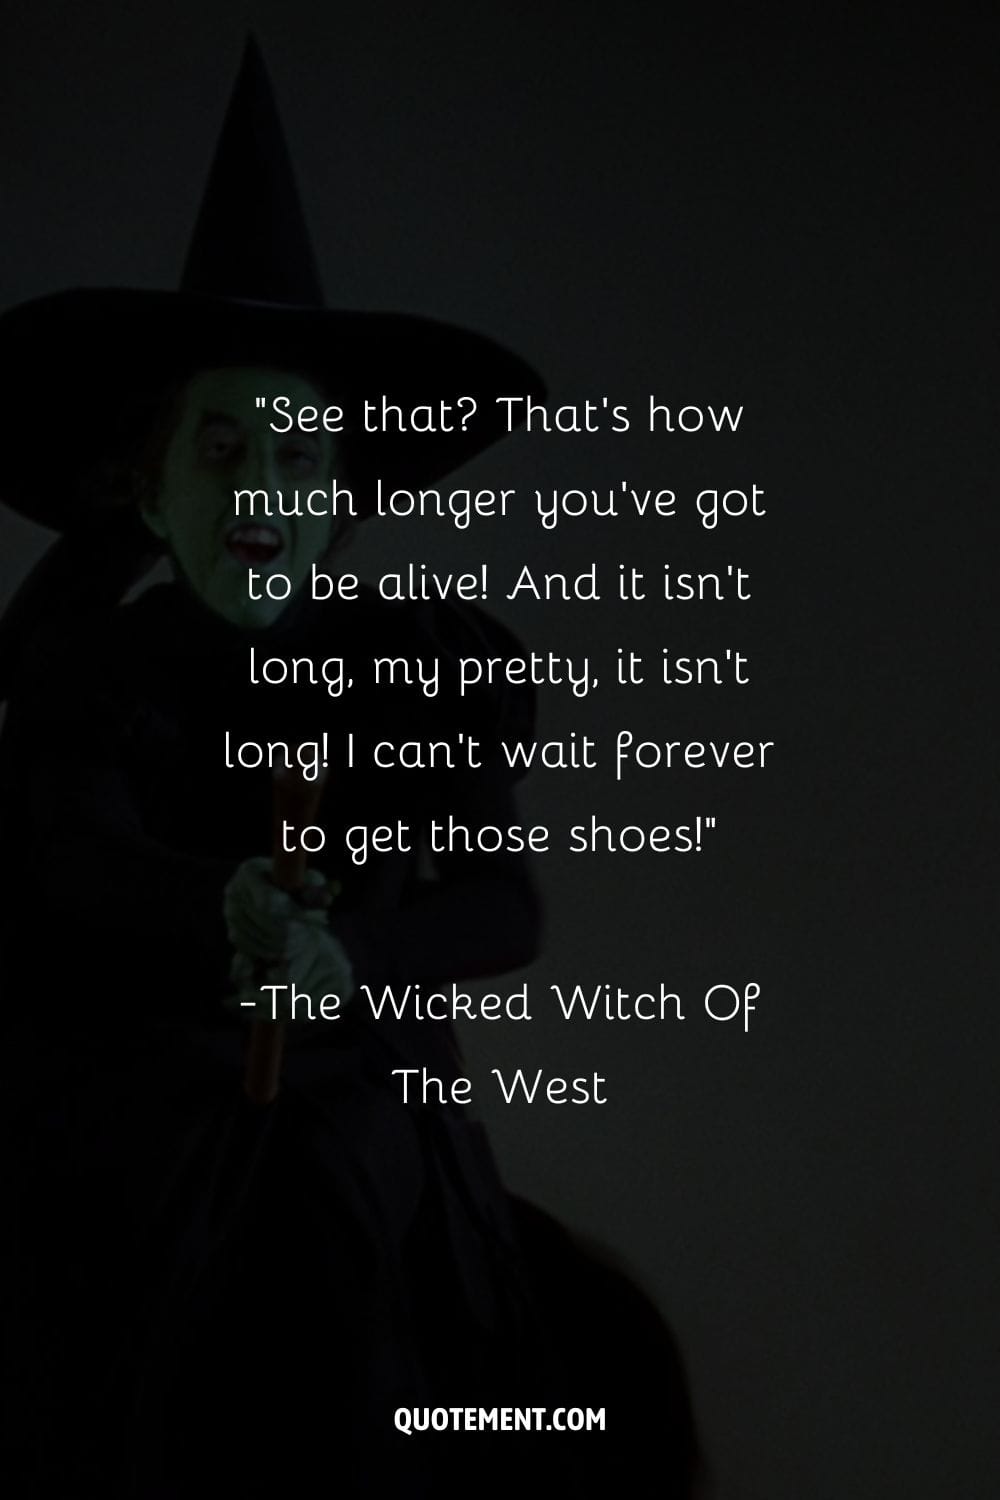 portrayal of the Wicked Witch on a broom
